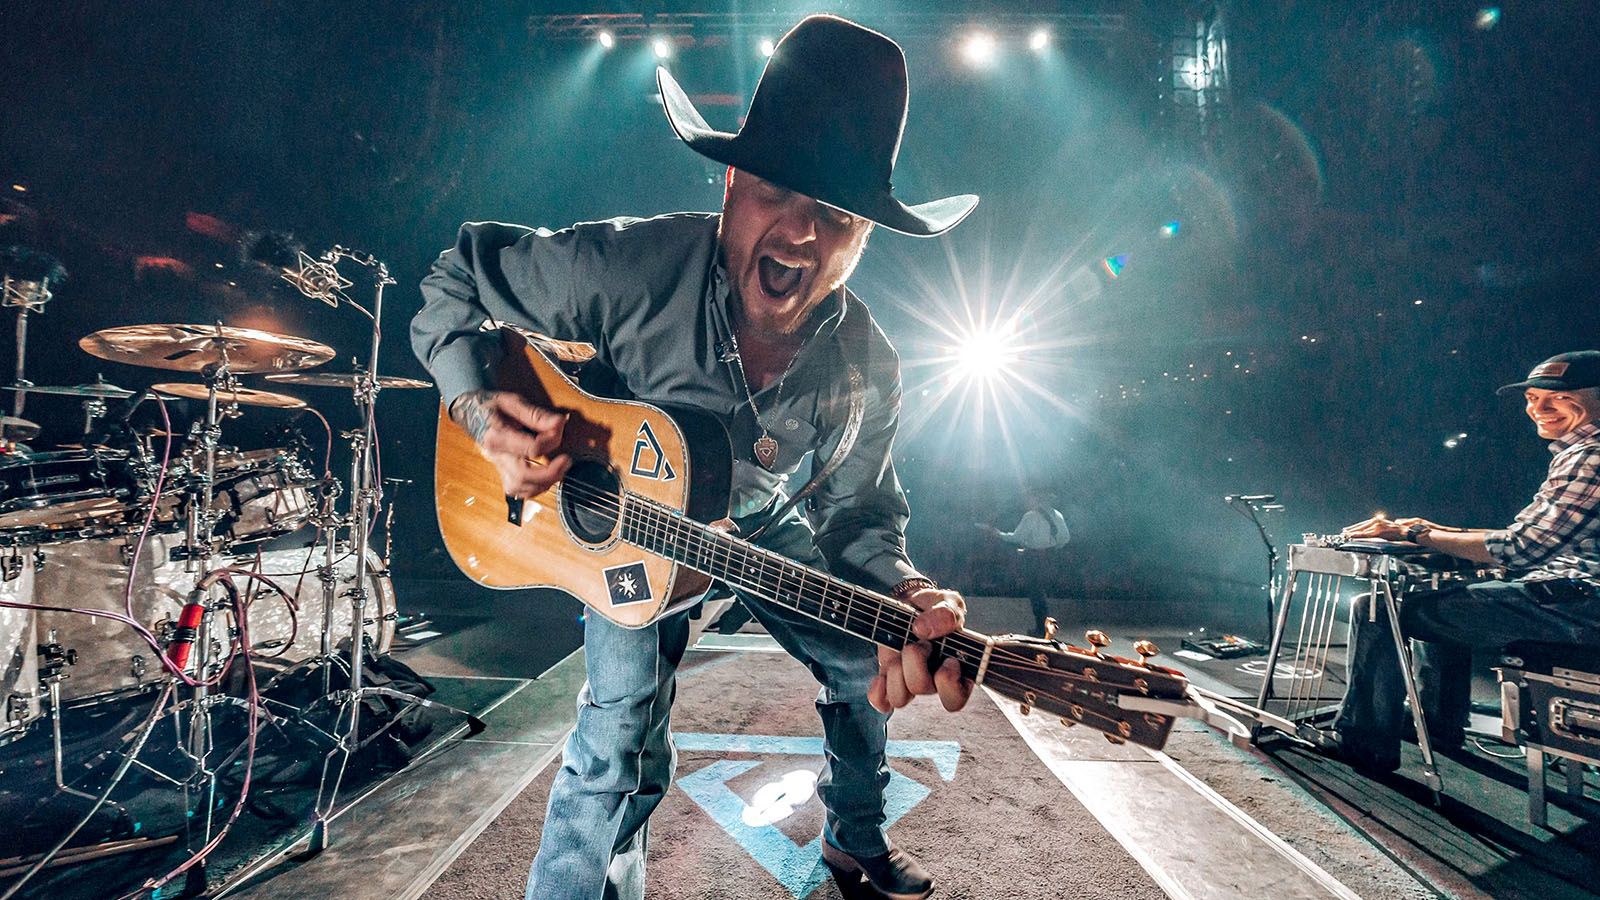 Cody Johnson will be joined by Randy Houser and Tyler Booth when he brings his tour to Memorial Coliseum on Friday, March 3.